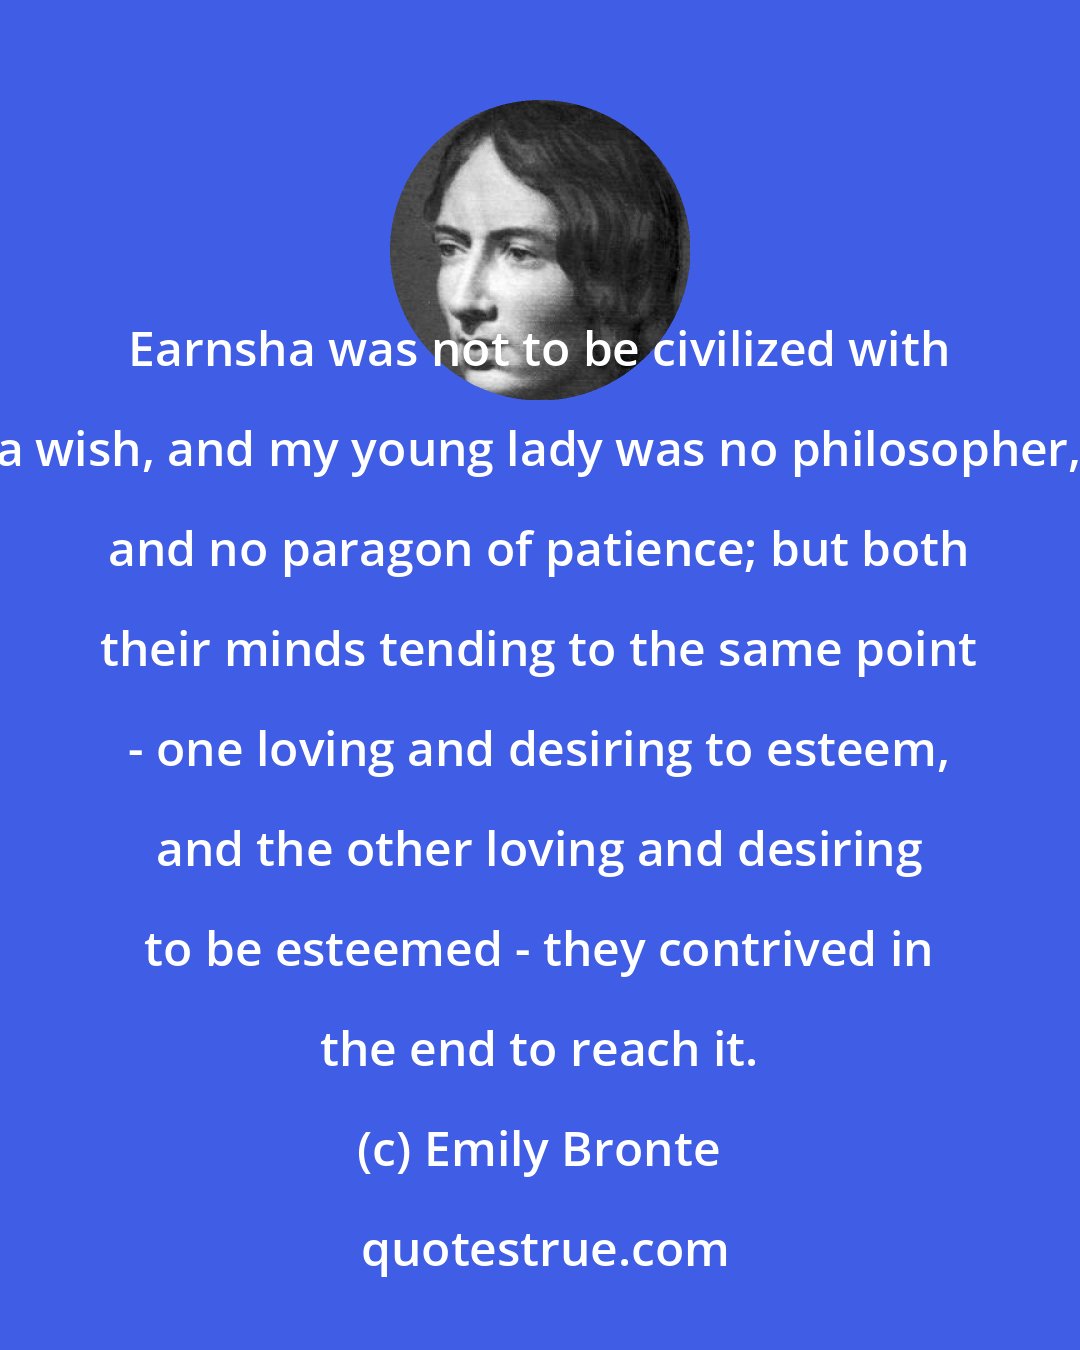 Emily Bronte: Earnsha was not to be civilized with a wish, and my young lady was no philosopher, and no paragon of patience; but both their minds tending to the same point - one loving and desiring to esteem, and the other loving and desiring to be esteemed - they contrived in the end to reach it.